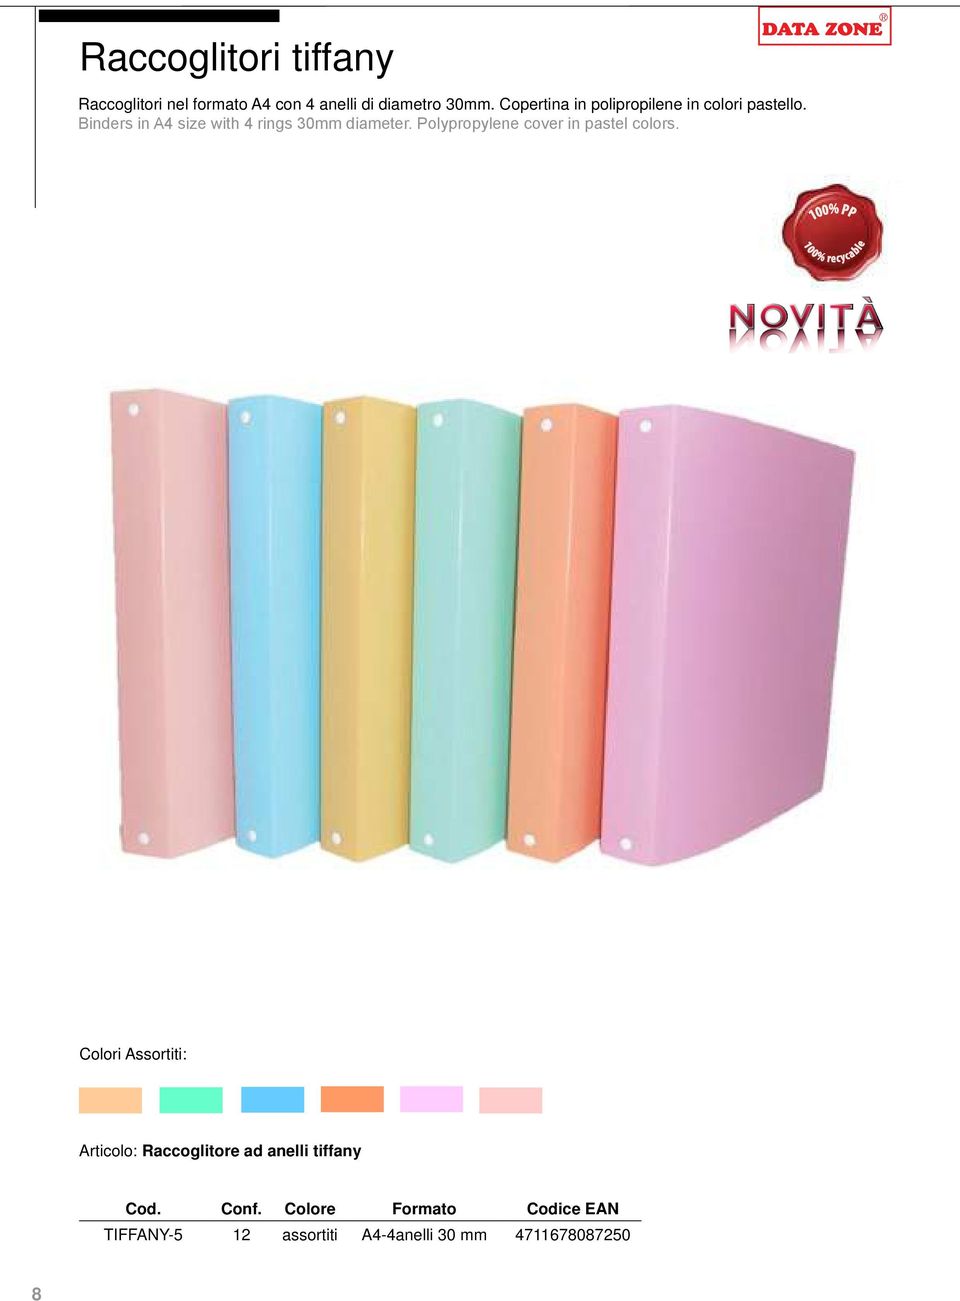 Binders in A4 size with 4 rings 30mm diameter. Polypropylene cover in pastel colors.